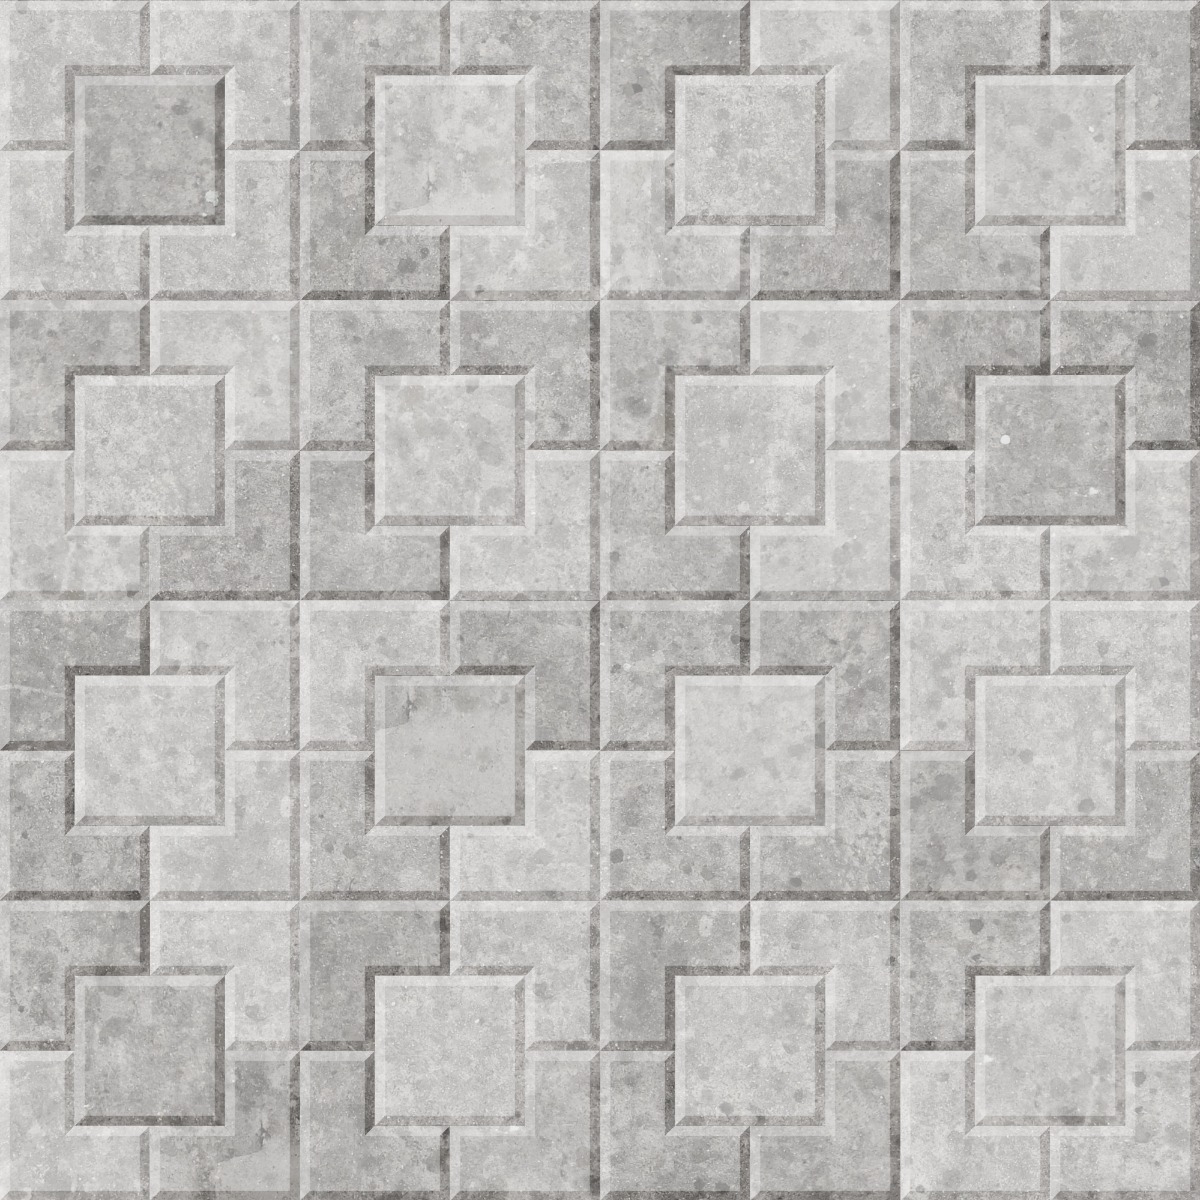 A seamless concrete texture with concrete blocks arranged in a Interlocking Rectangle with Square pattern